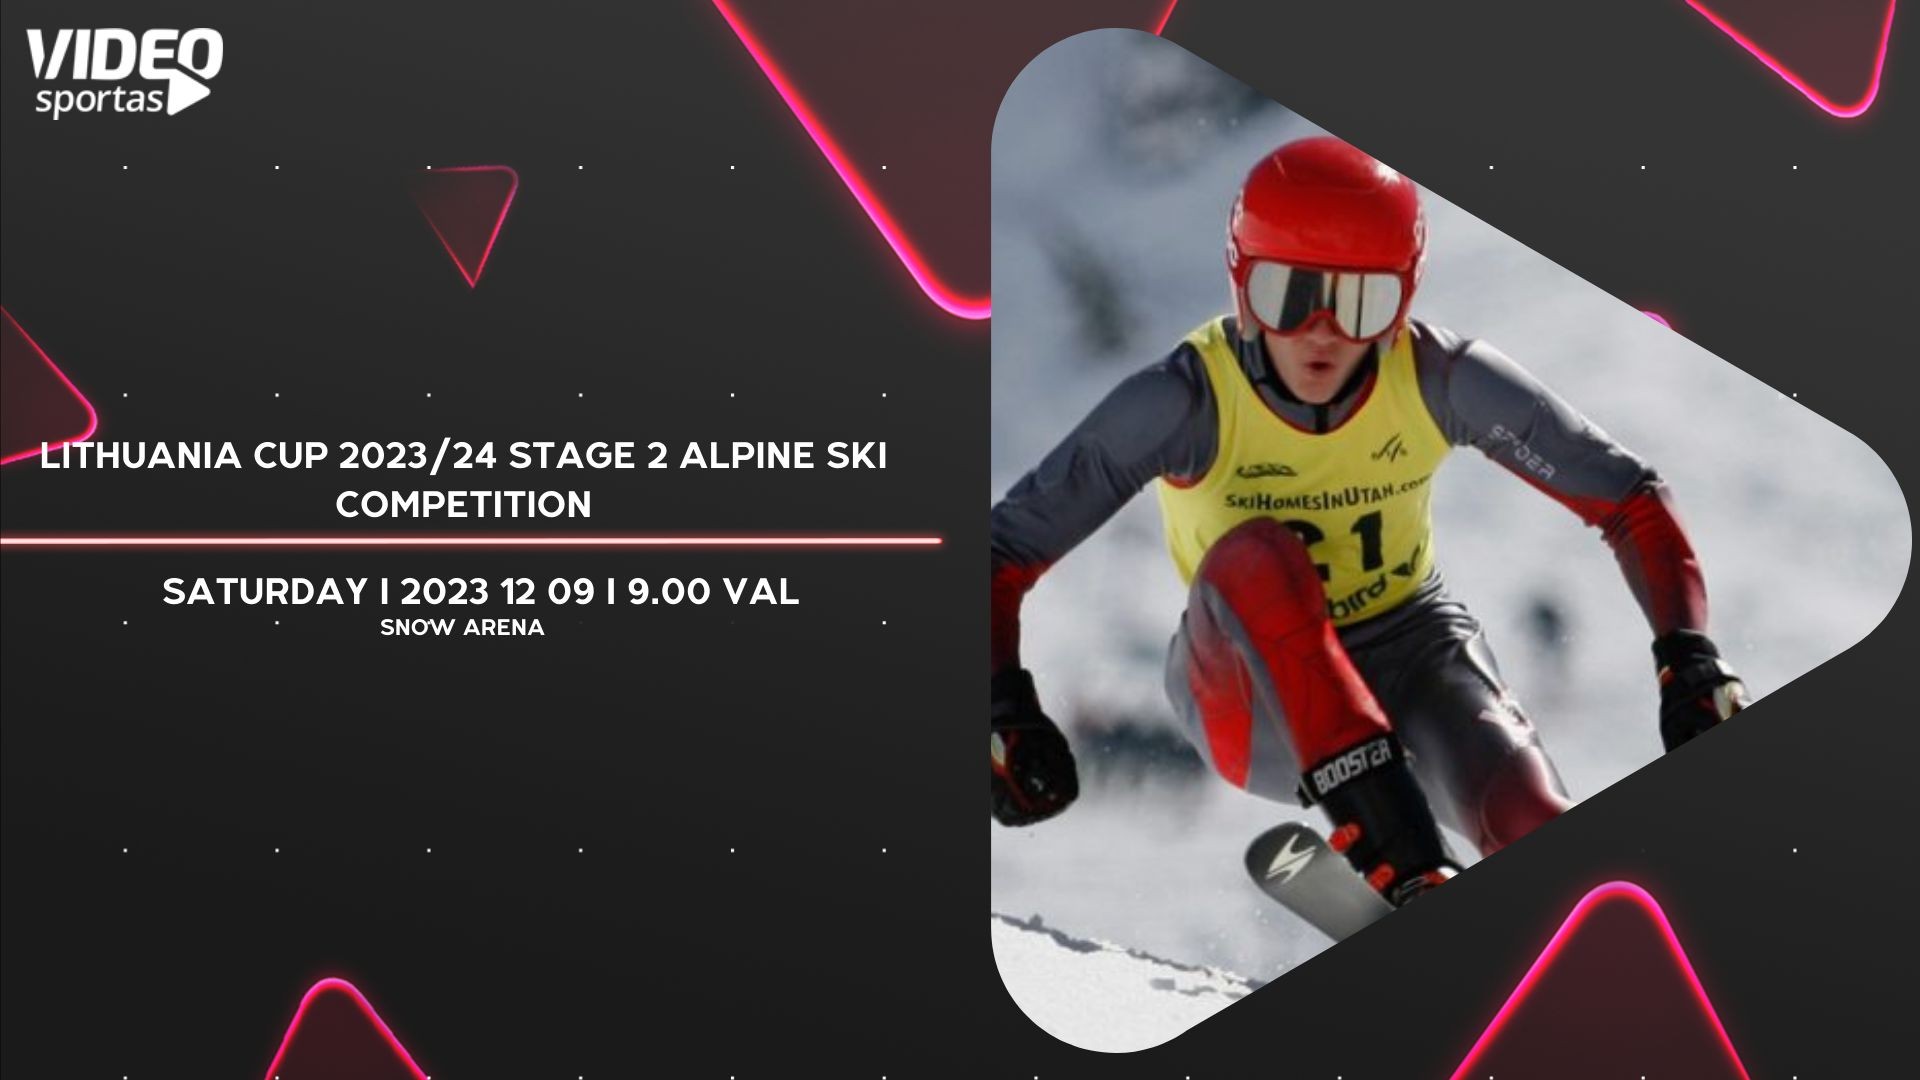 LITHUANIA CUP 2023/24 STAGE 2 ALPINE SKI COMPETITION